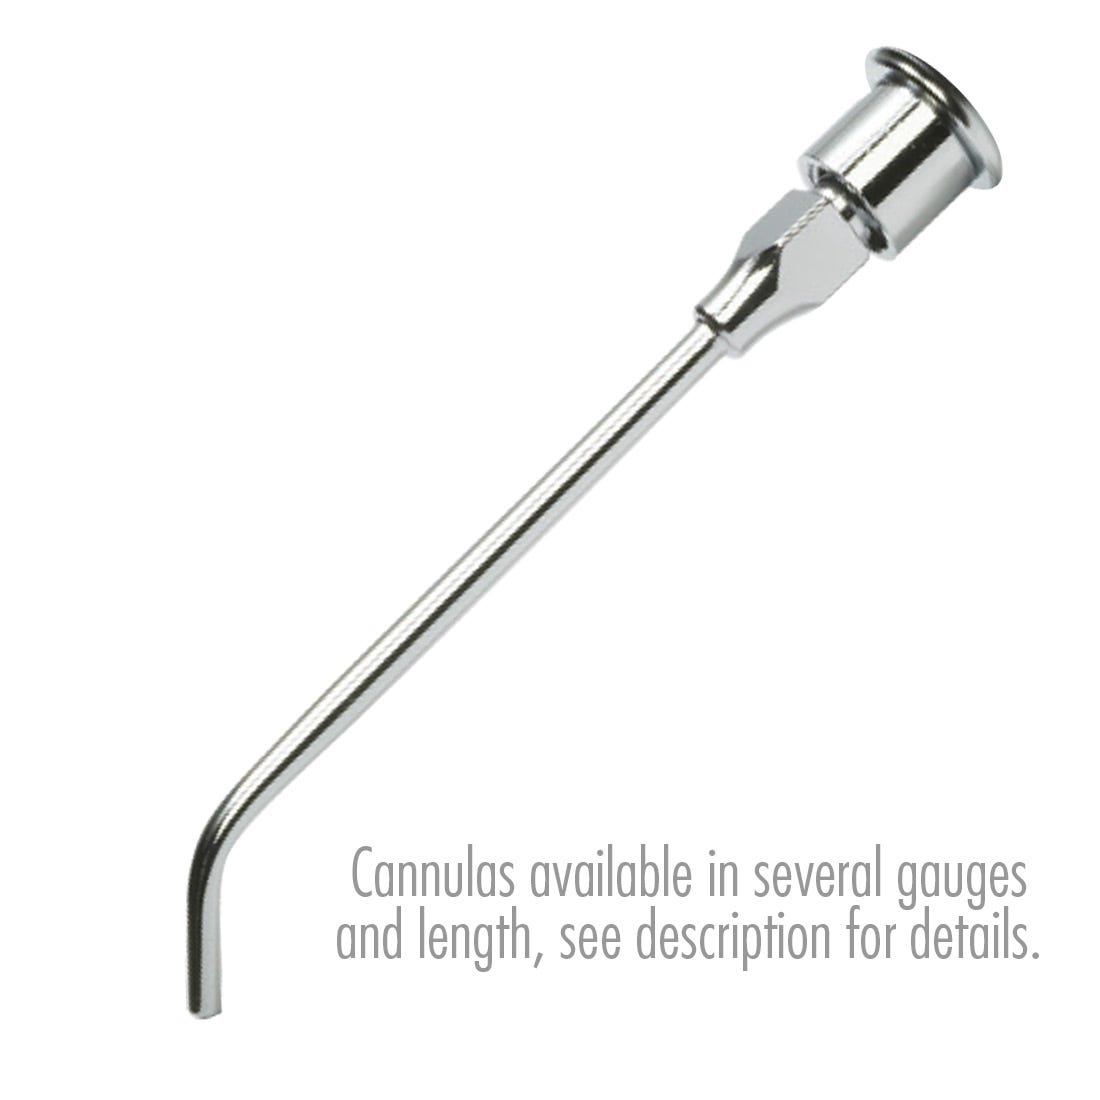 ACE Irrigation Cannula - Stainless Steel 20G x  2" , 45 degree angle